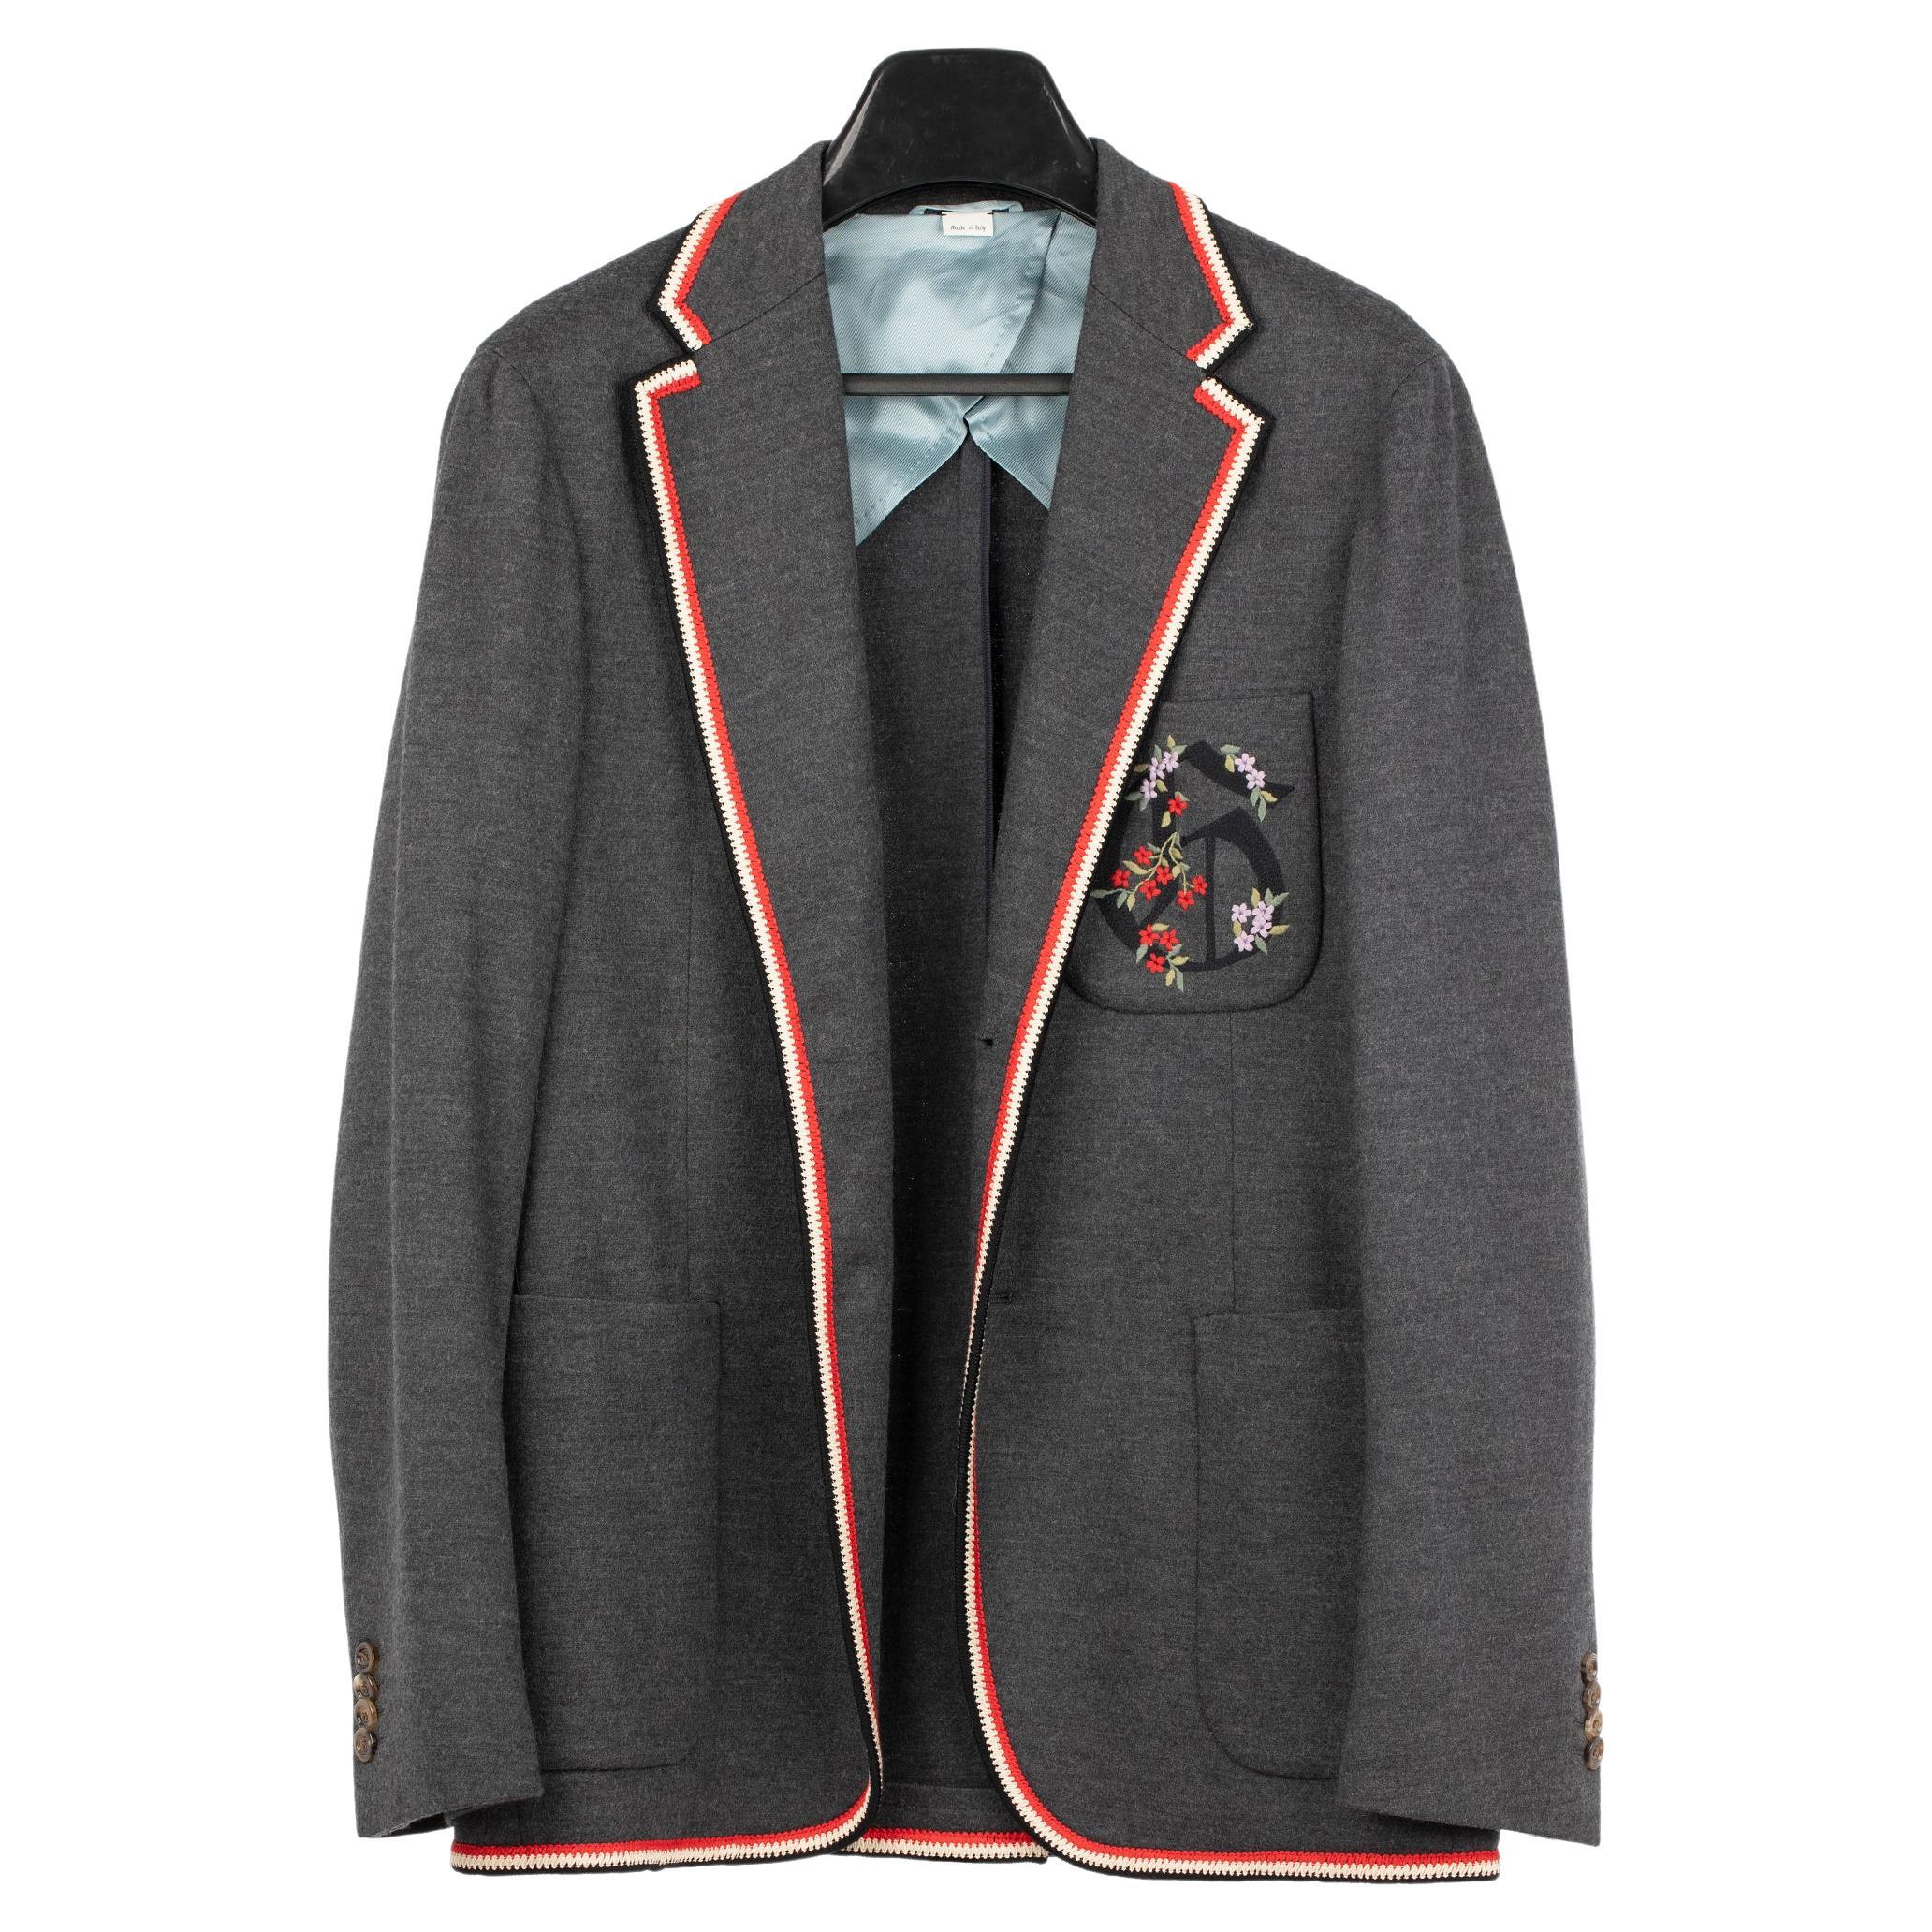 Gucci Mens Grey Blazer With Floral Embroidery 48 IT For Sale